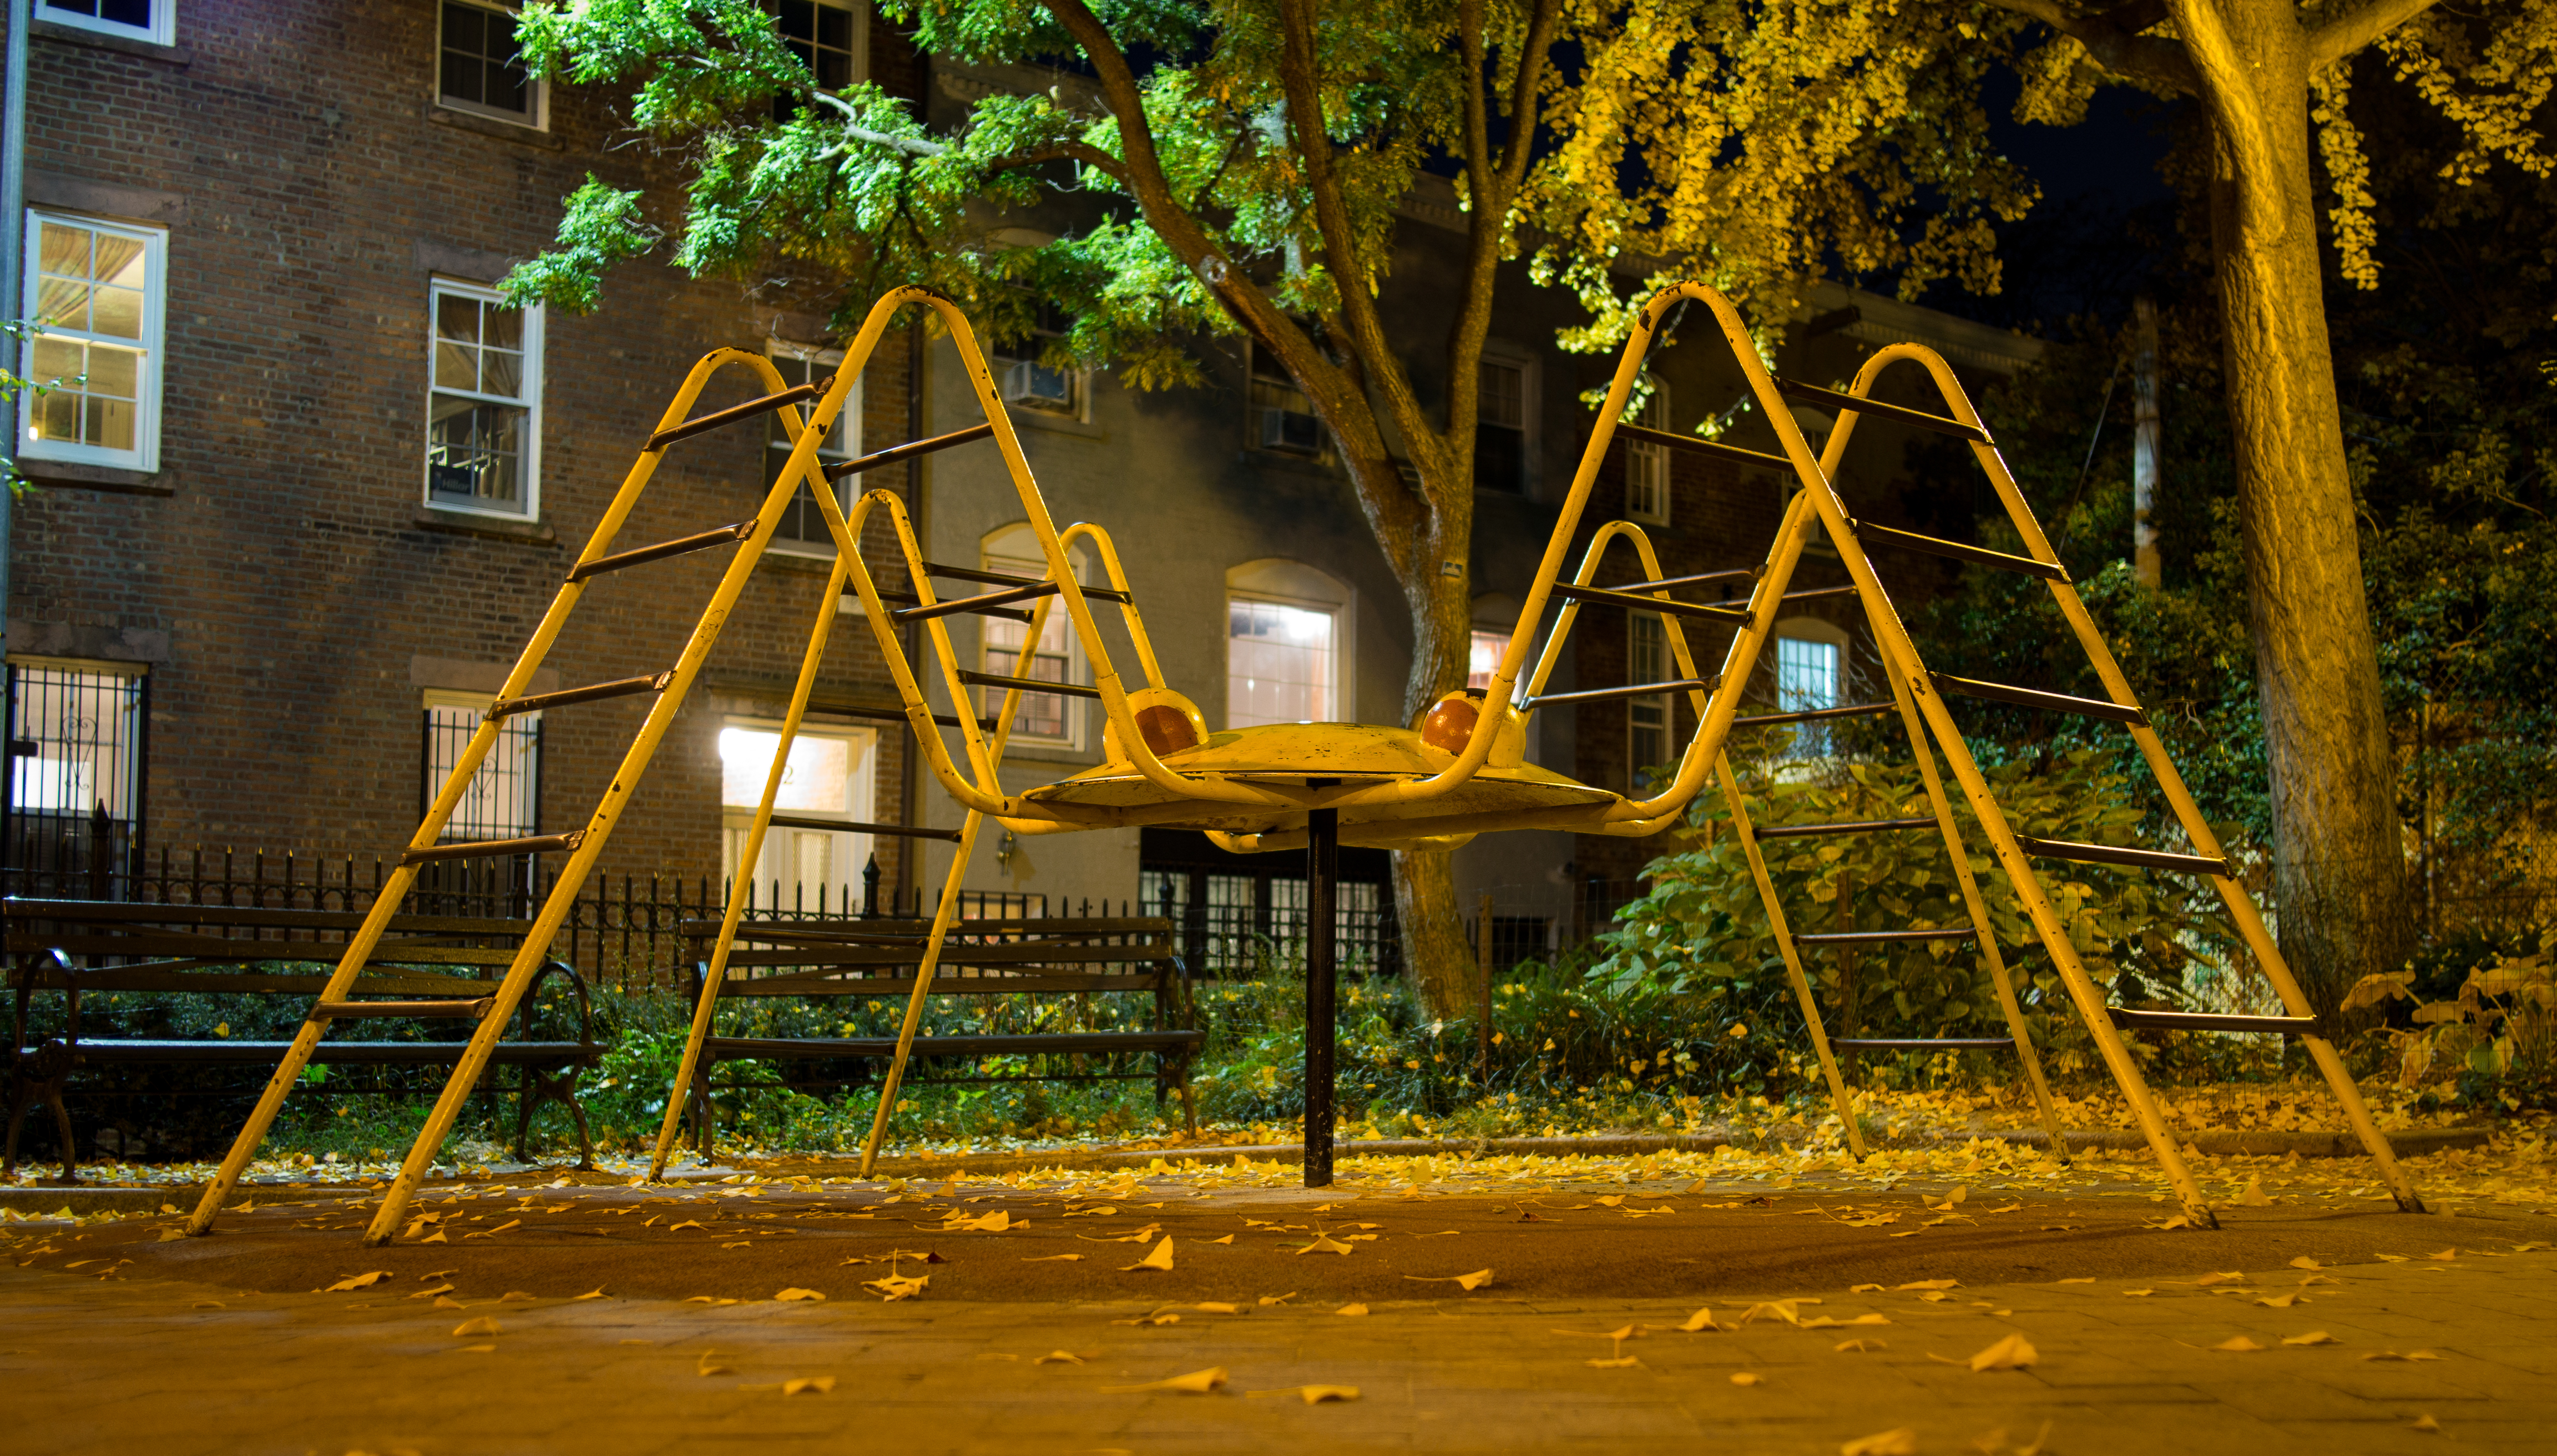 File:Spider jungle gym (70627).jpg - Wikimedia Commons